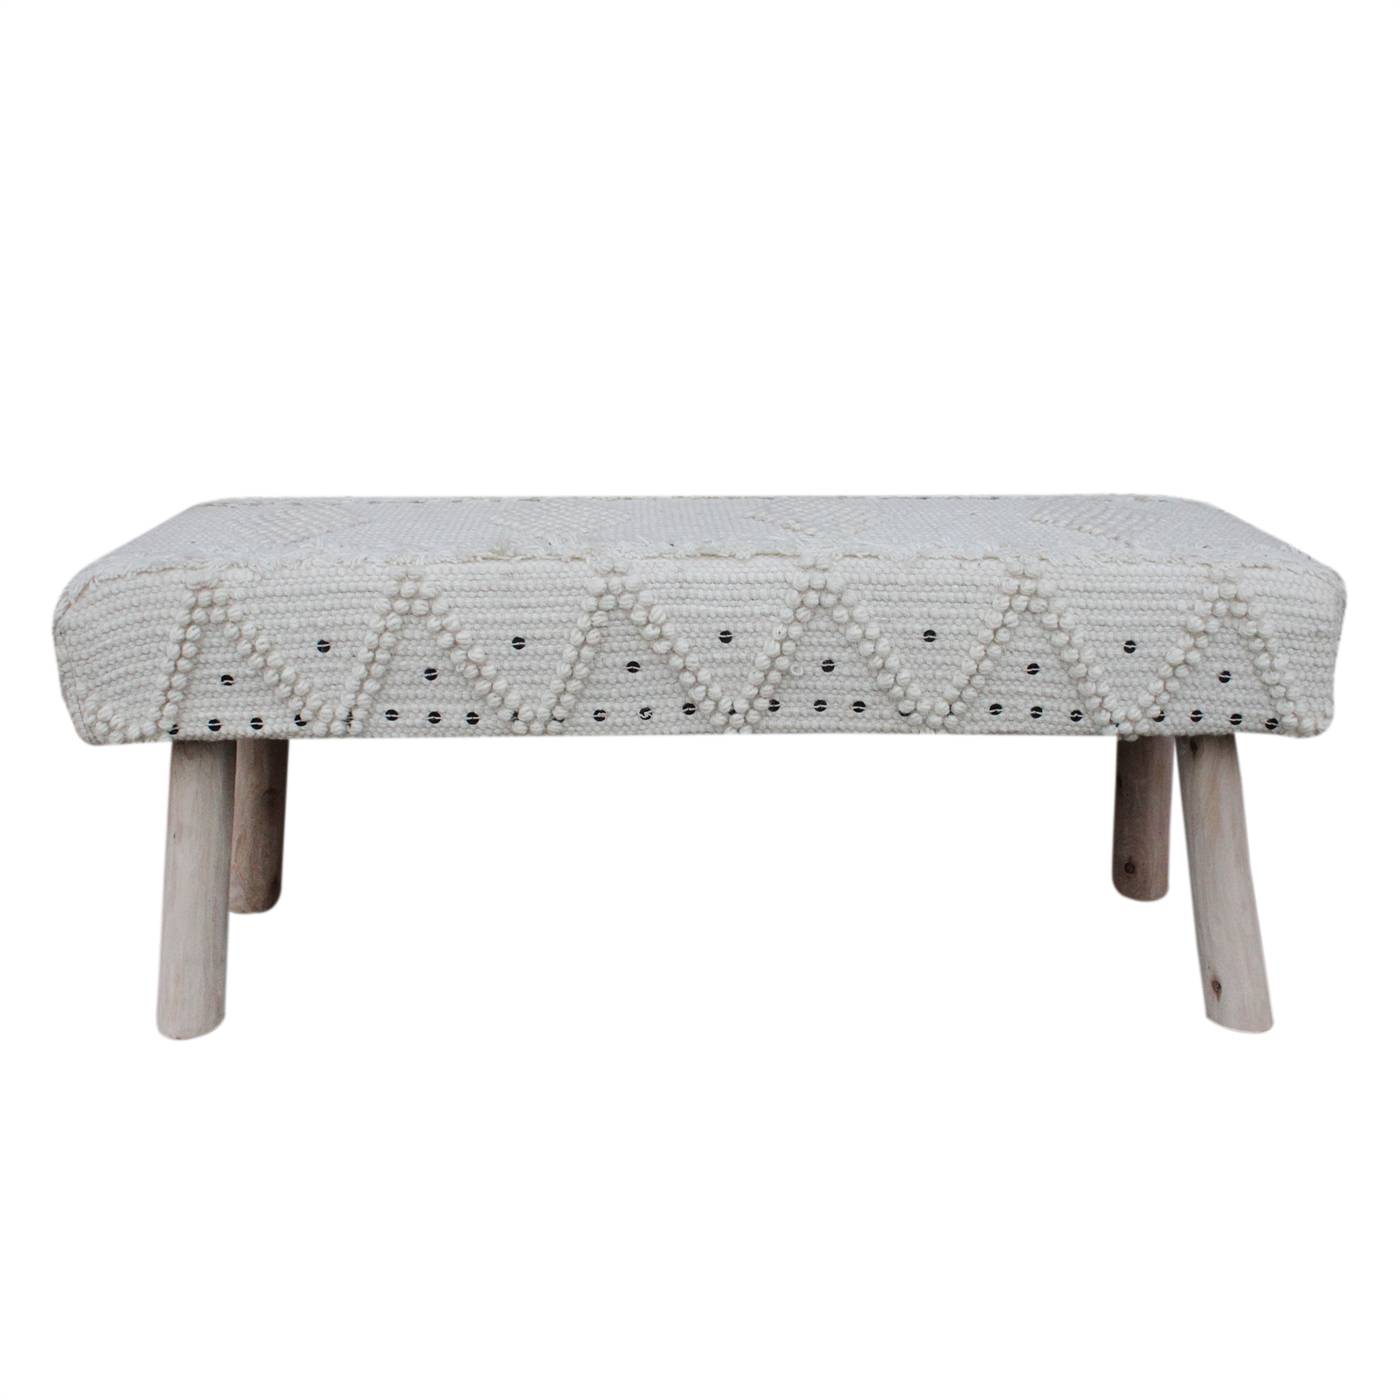 Roja Bench, 120x40x50 cm, Natural White, Wool, Metal Sequence, Hand Woven, Pitloom, Cut And Loop